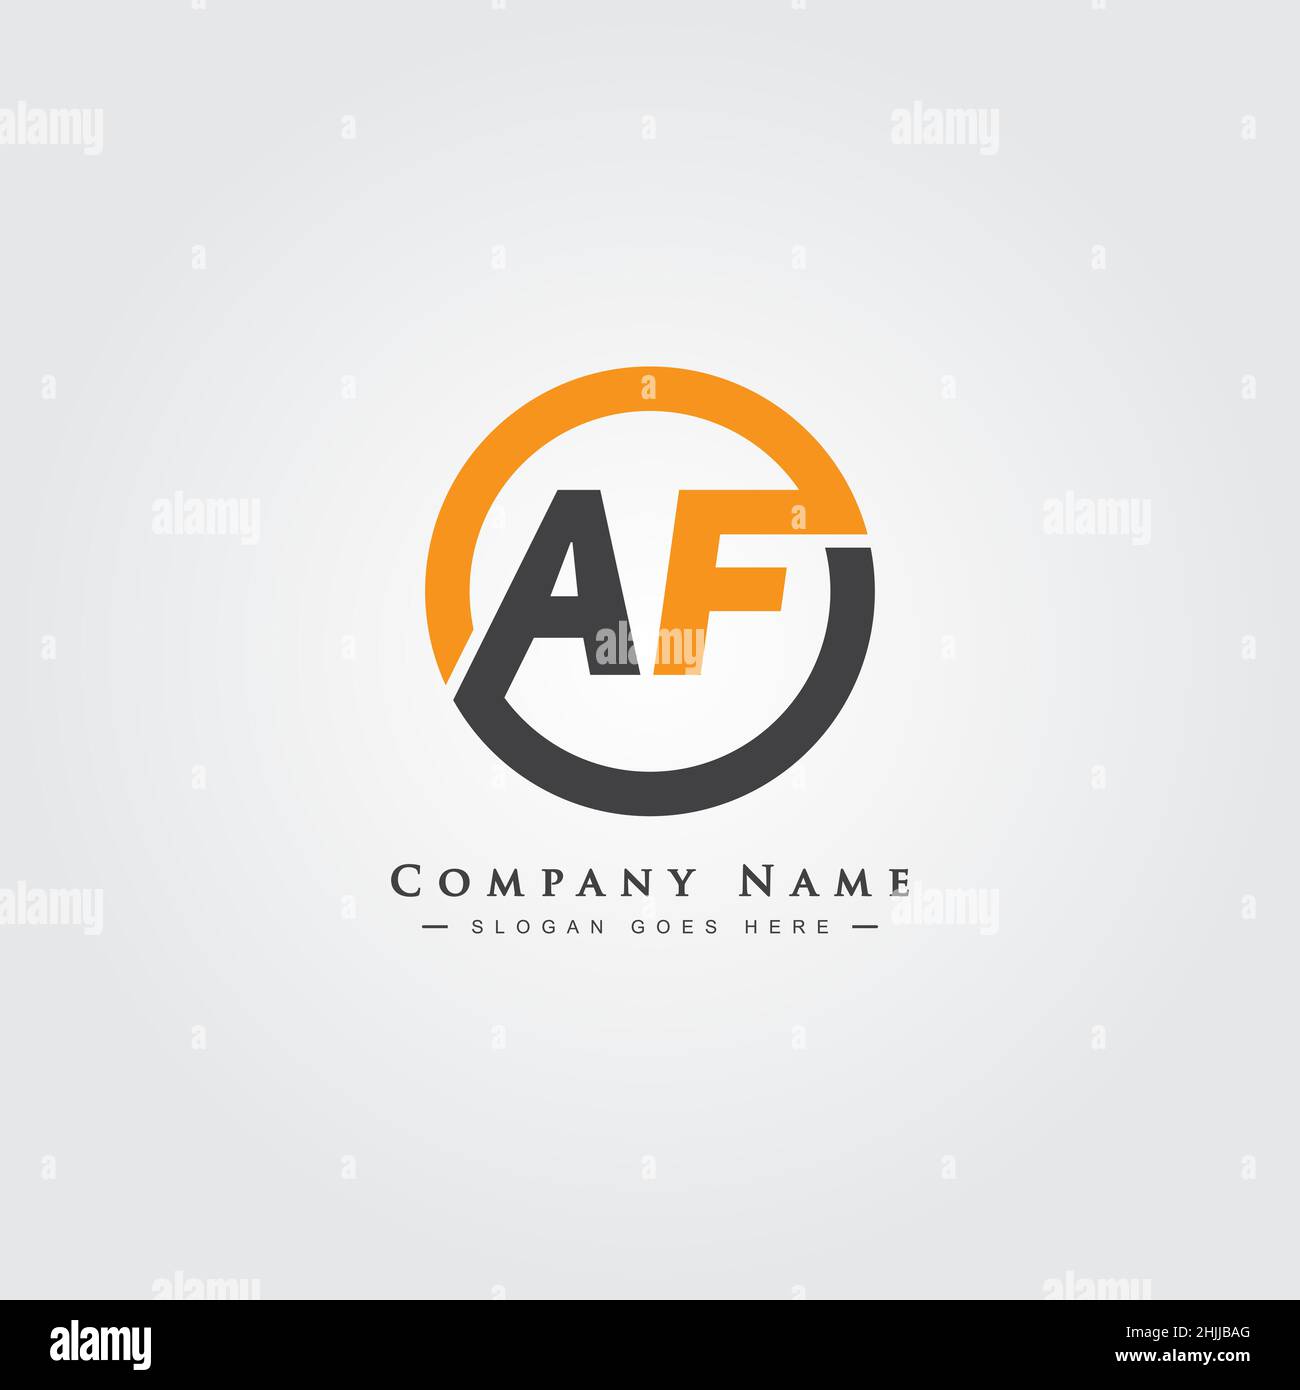 Minimal Business logo for Alphabet AF - Initial Letter A and F Logo Stock Vector